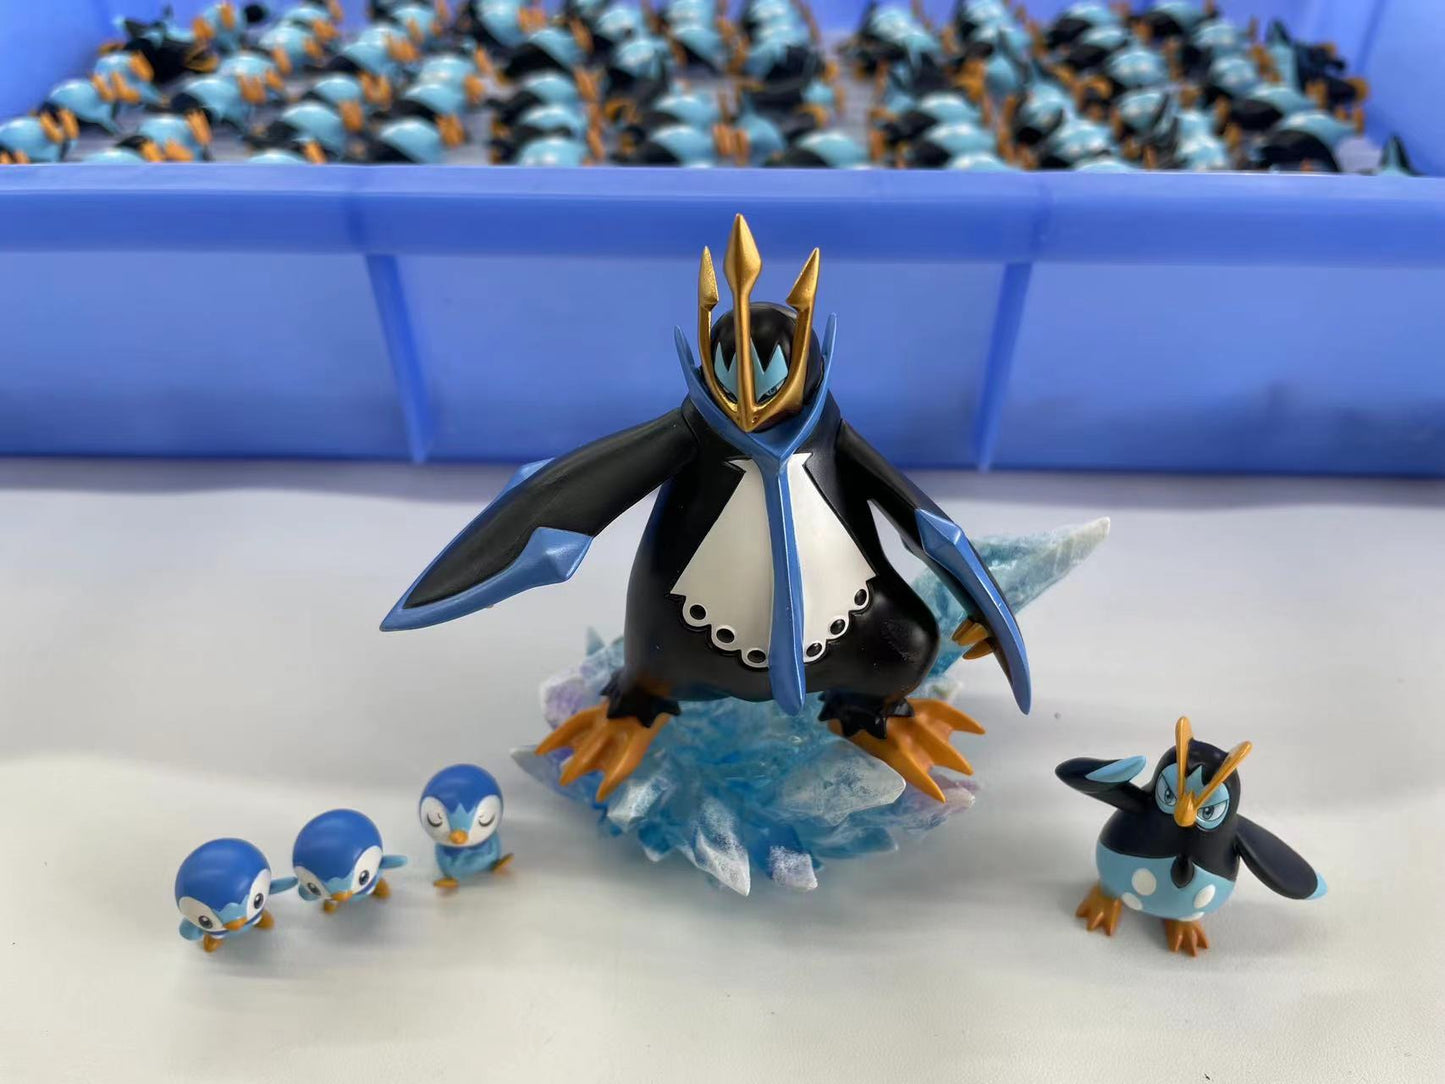 〖Sold Out〗Pokemon Scale World Piplup Prinplup Empoleon #393 #394 #395 1:20 - Pallet Town Studio